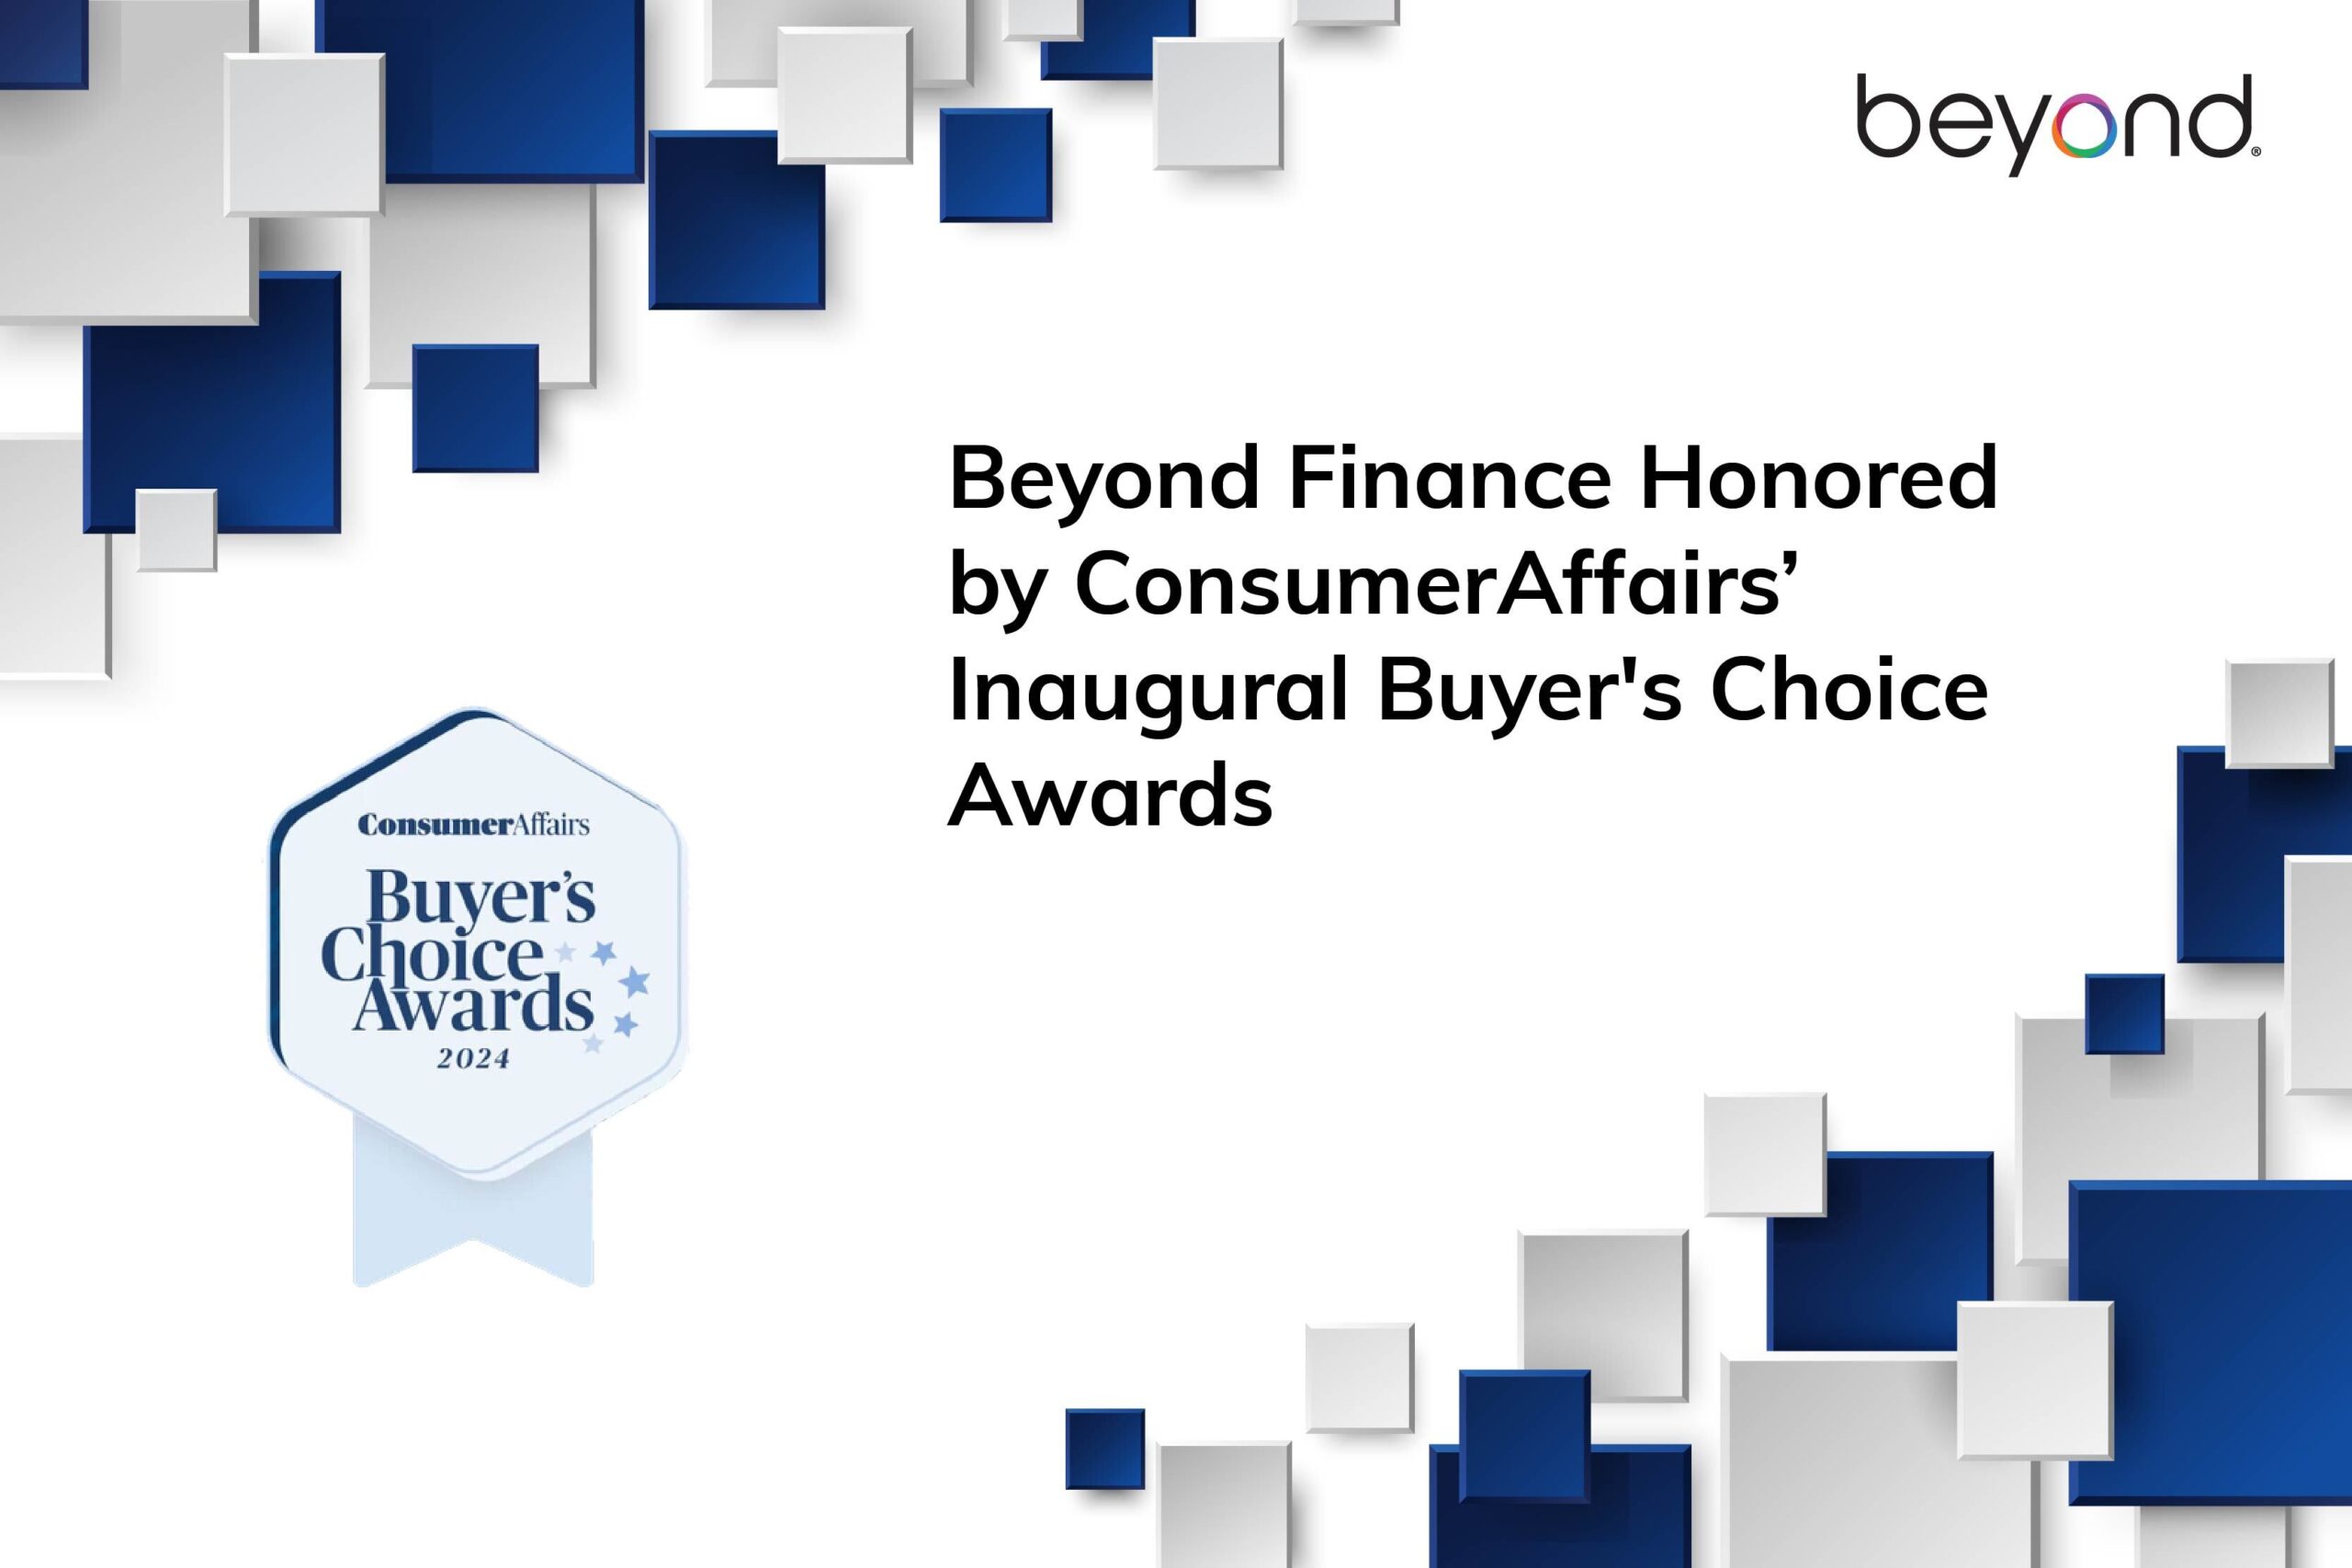 Beyond Finance Honored by ConsumerAffairs for three awards